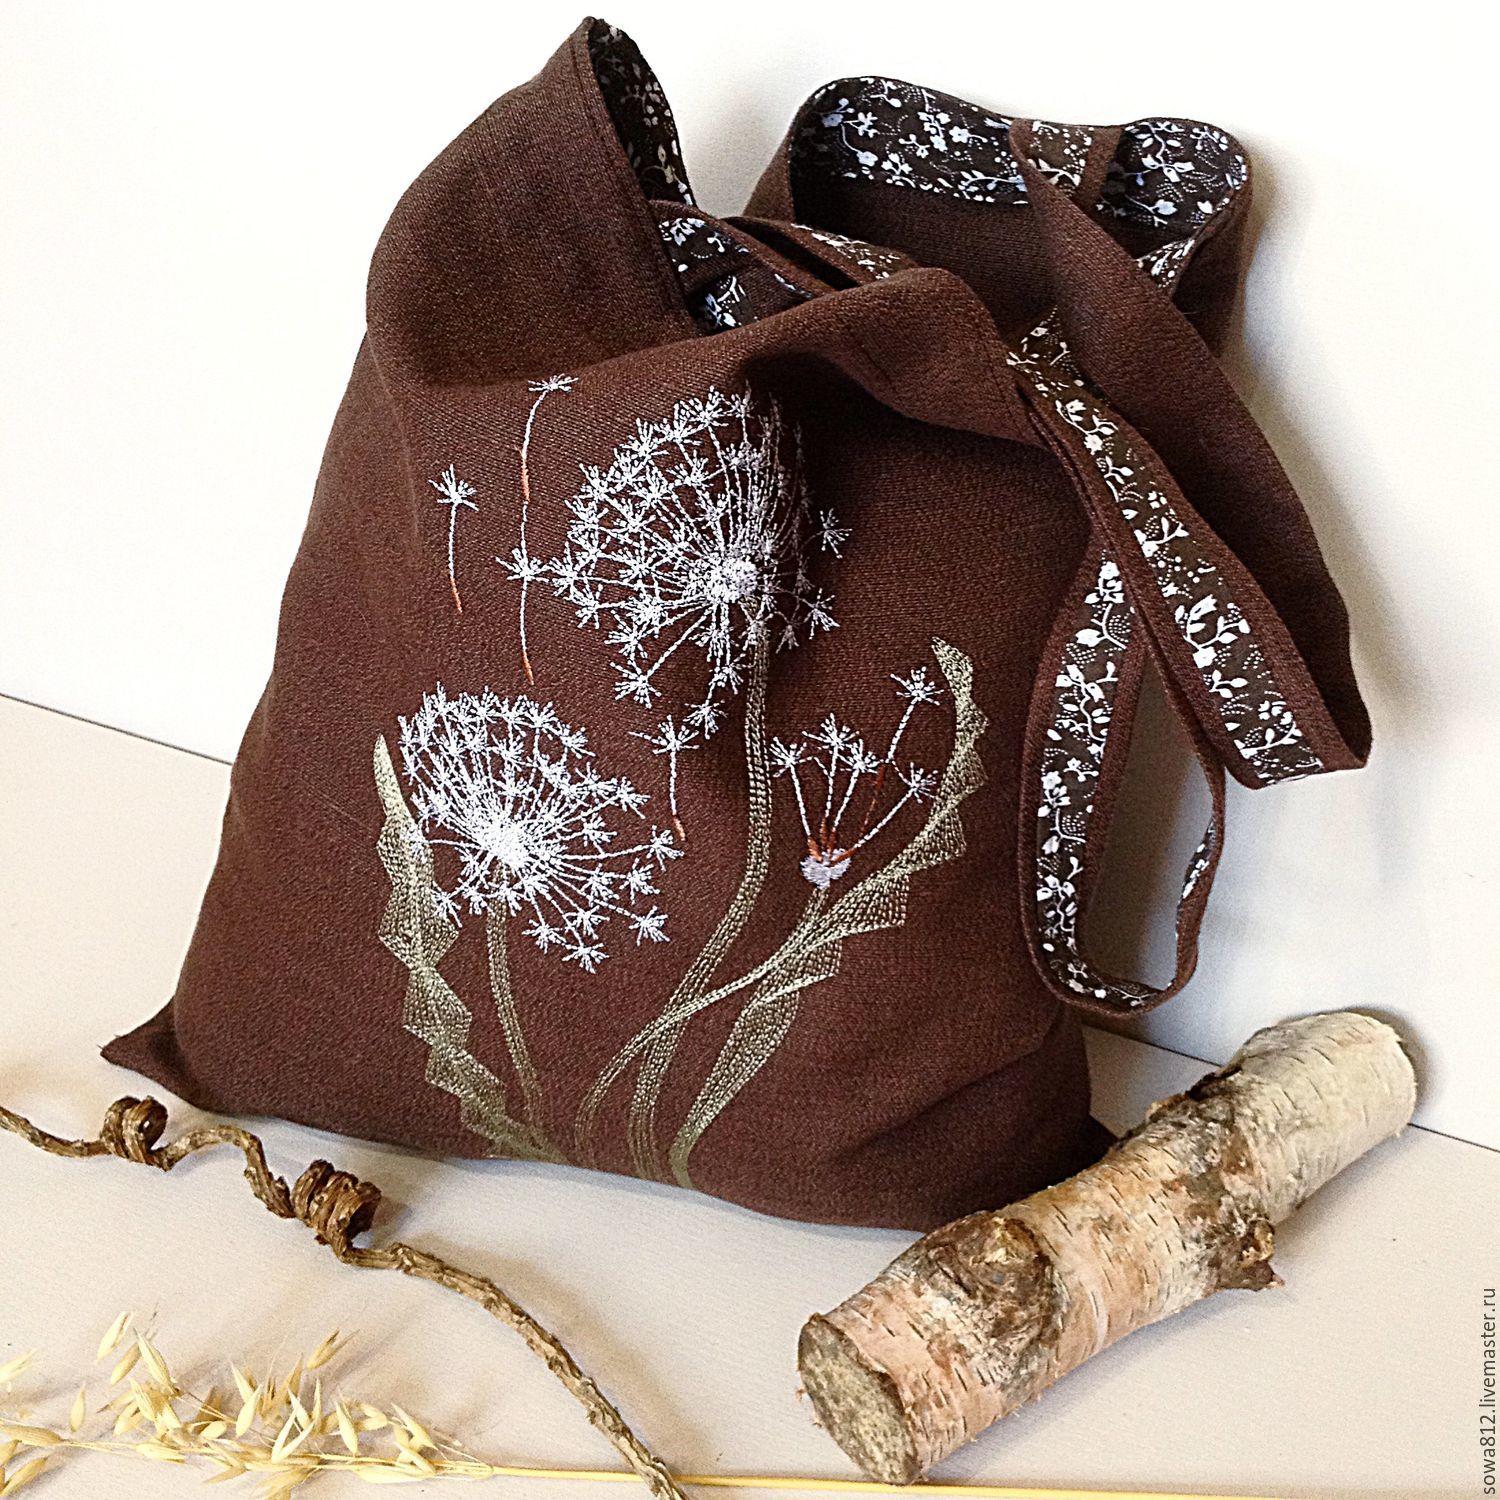 Embroidered bag with light dandelions free design